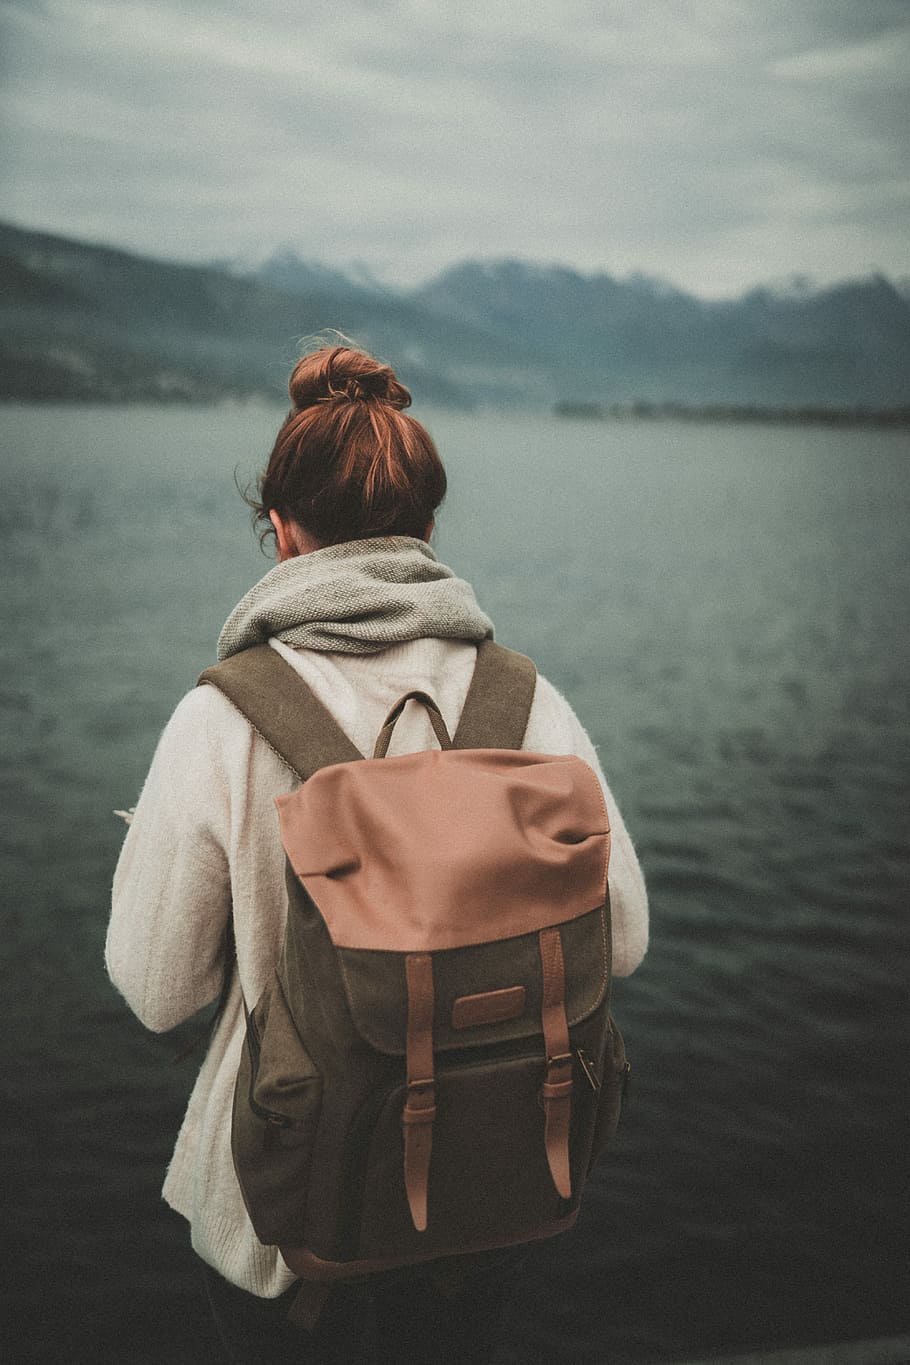 woman standing nearby calm body of water ], woman in white jacket with brown backpack standing over body of water, HD wallpaper